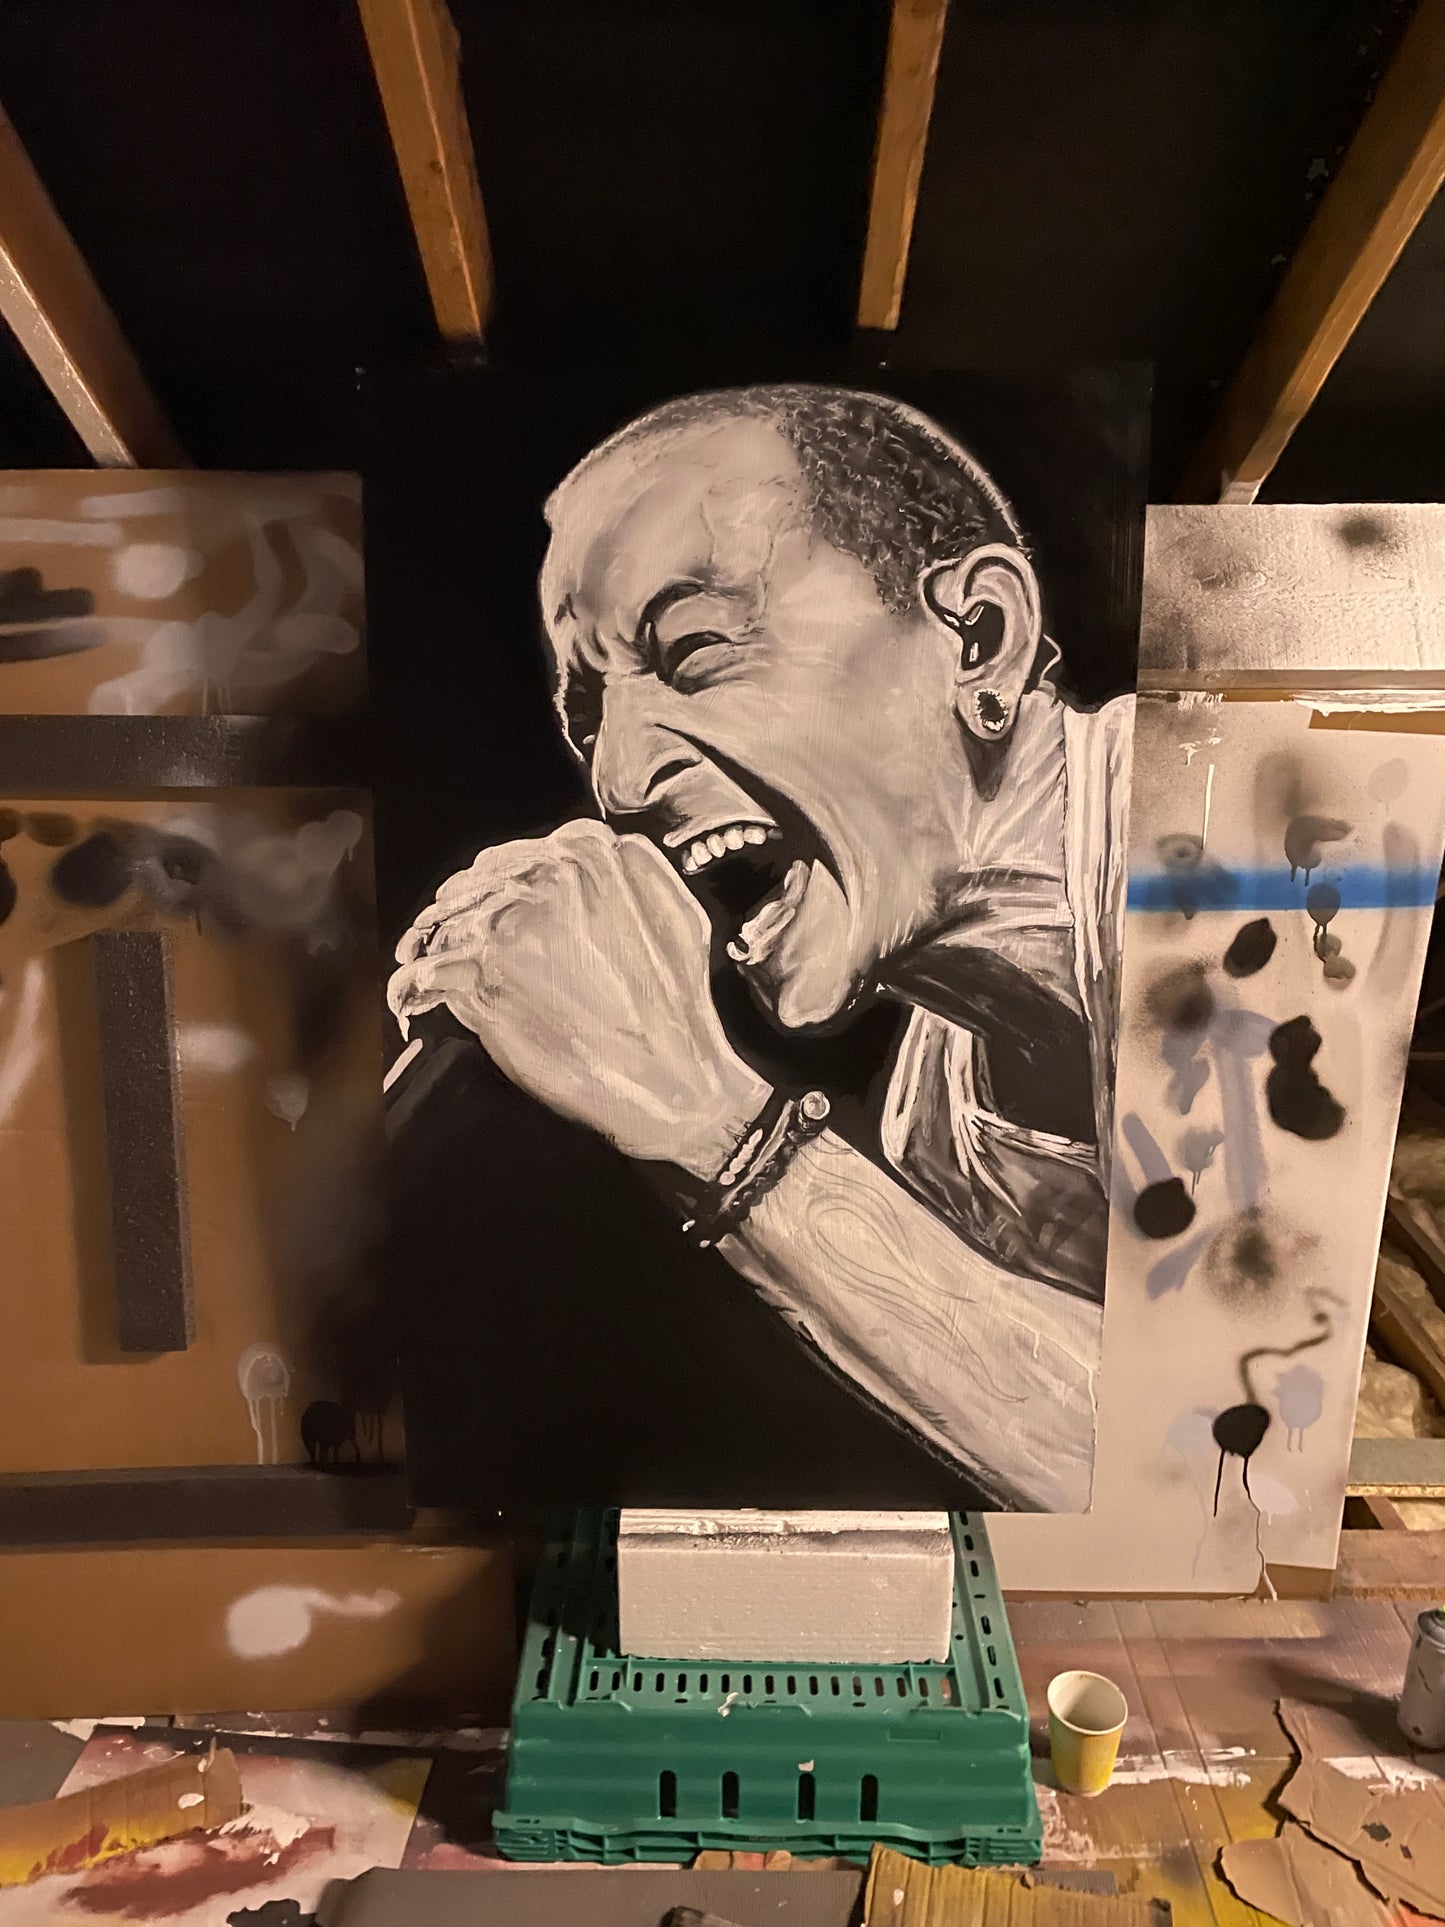 ‘Collision Course’ JayZ and Linkin Park Limited Edition Print